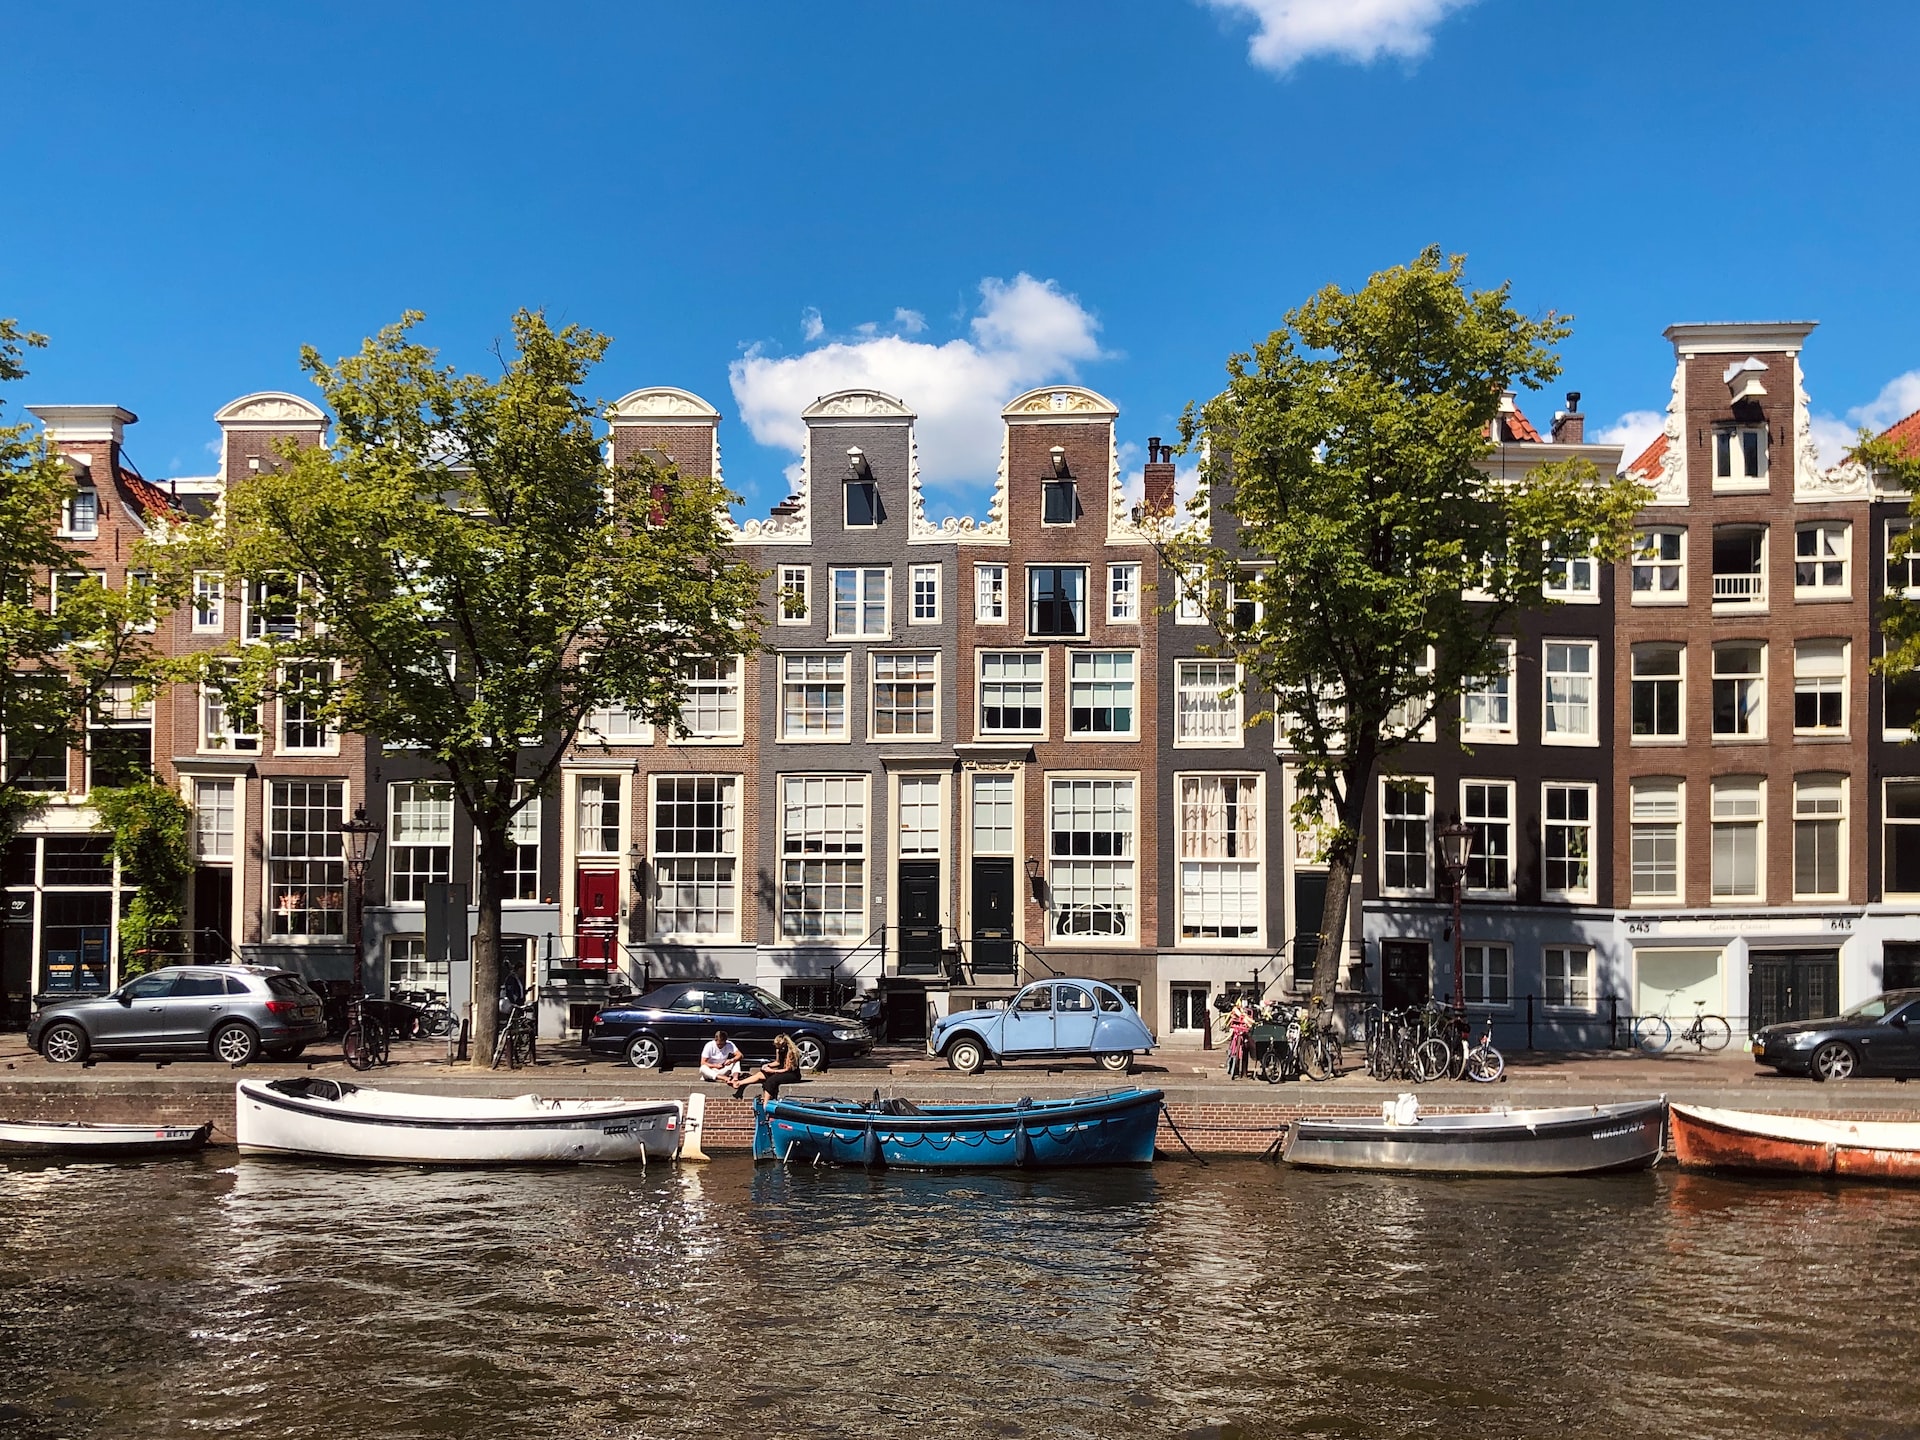 Houses and boats sit alongside a canal in Amsterdam.